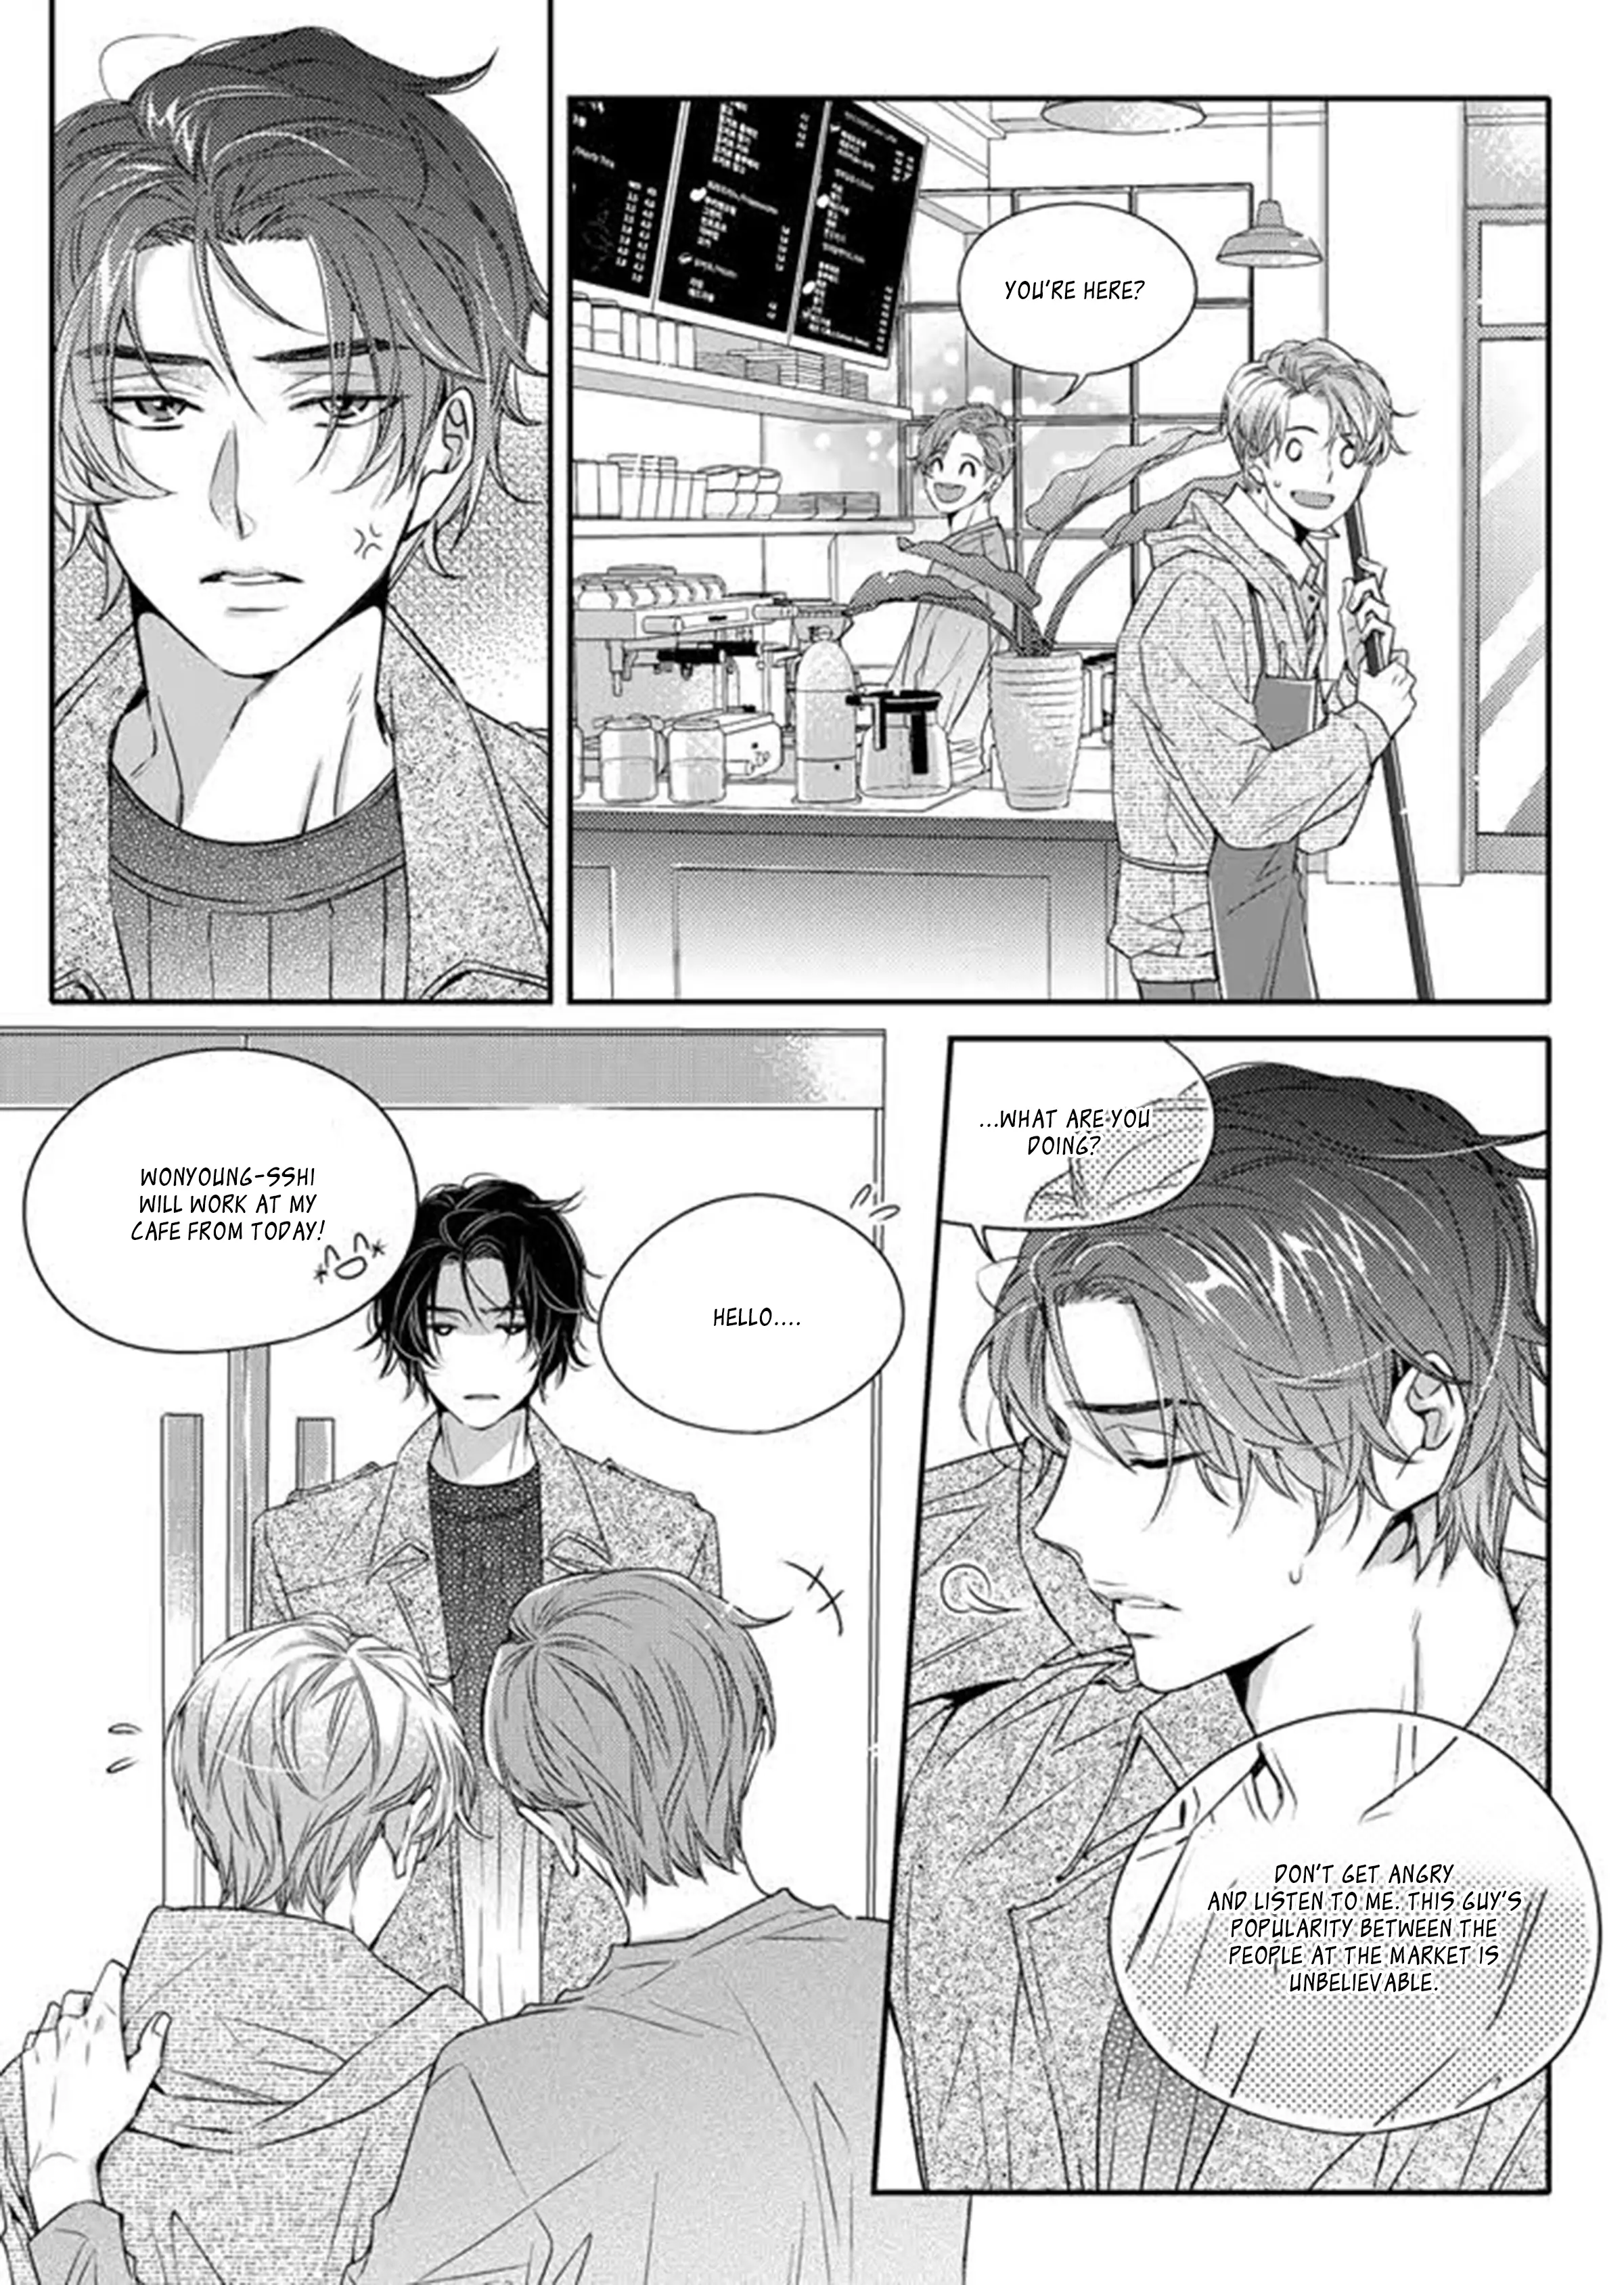 Unintentional Love Story - 3 page 6